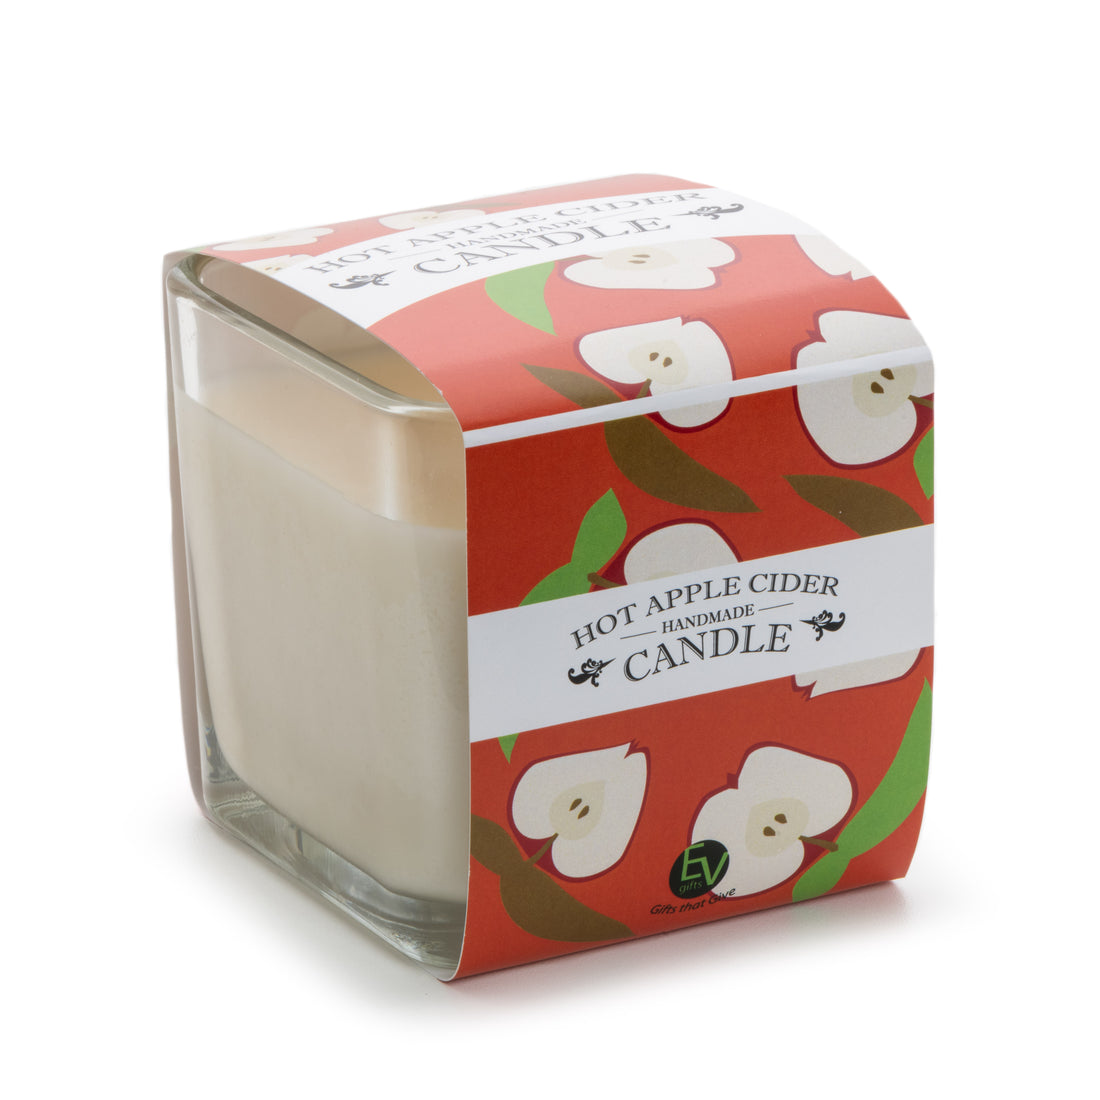 Hot Apple Cider Soy Candle, Double Wick